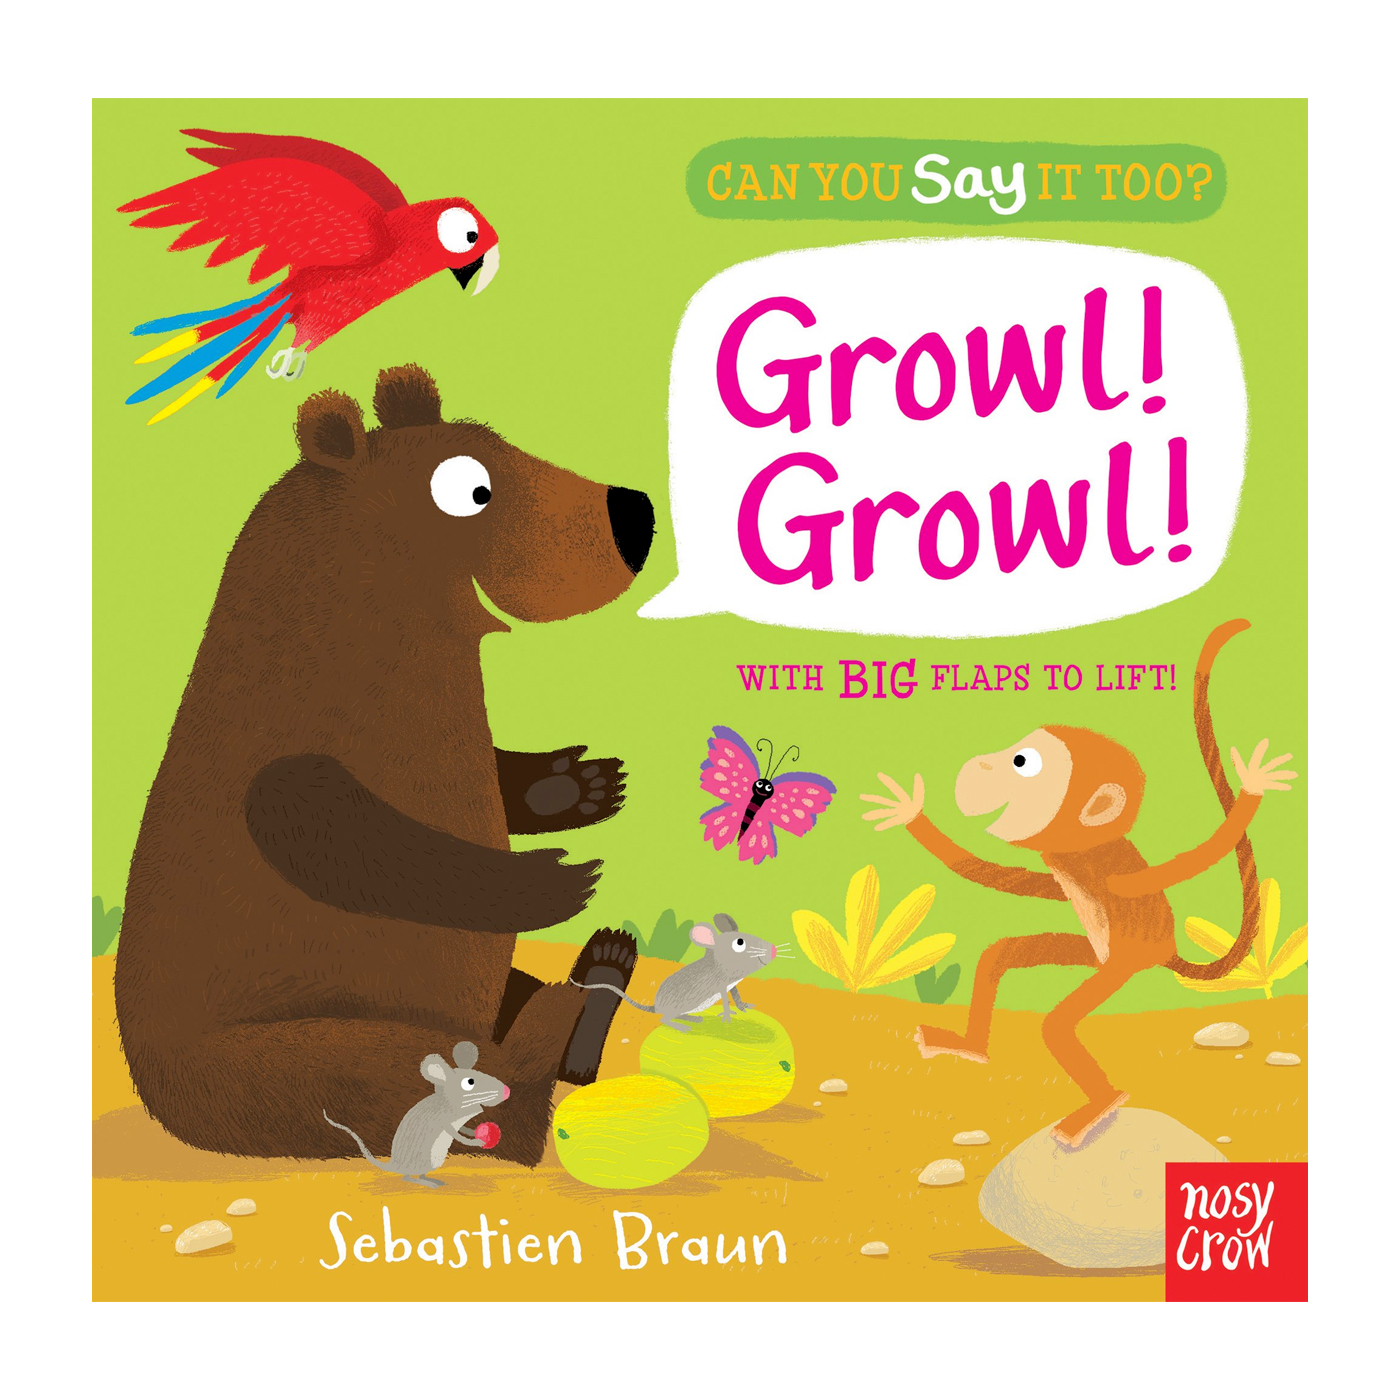 NOSY CROW Can You Say It Too? Growl! Growl!